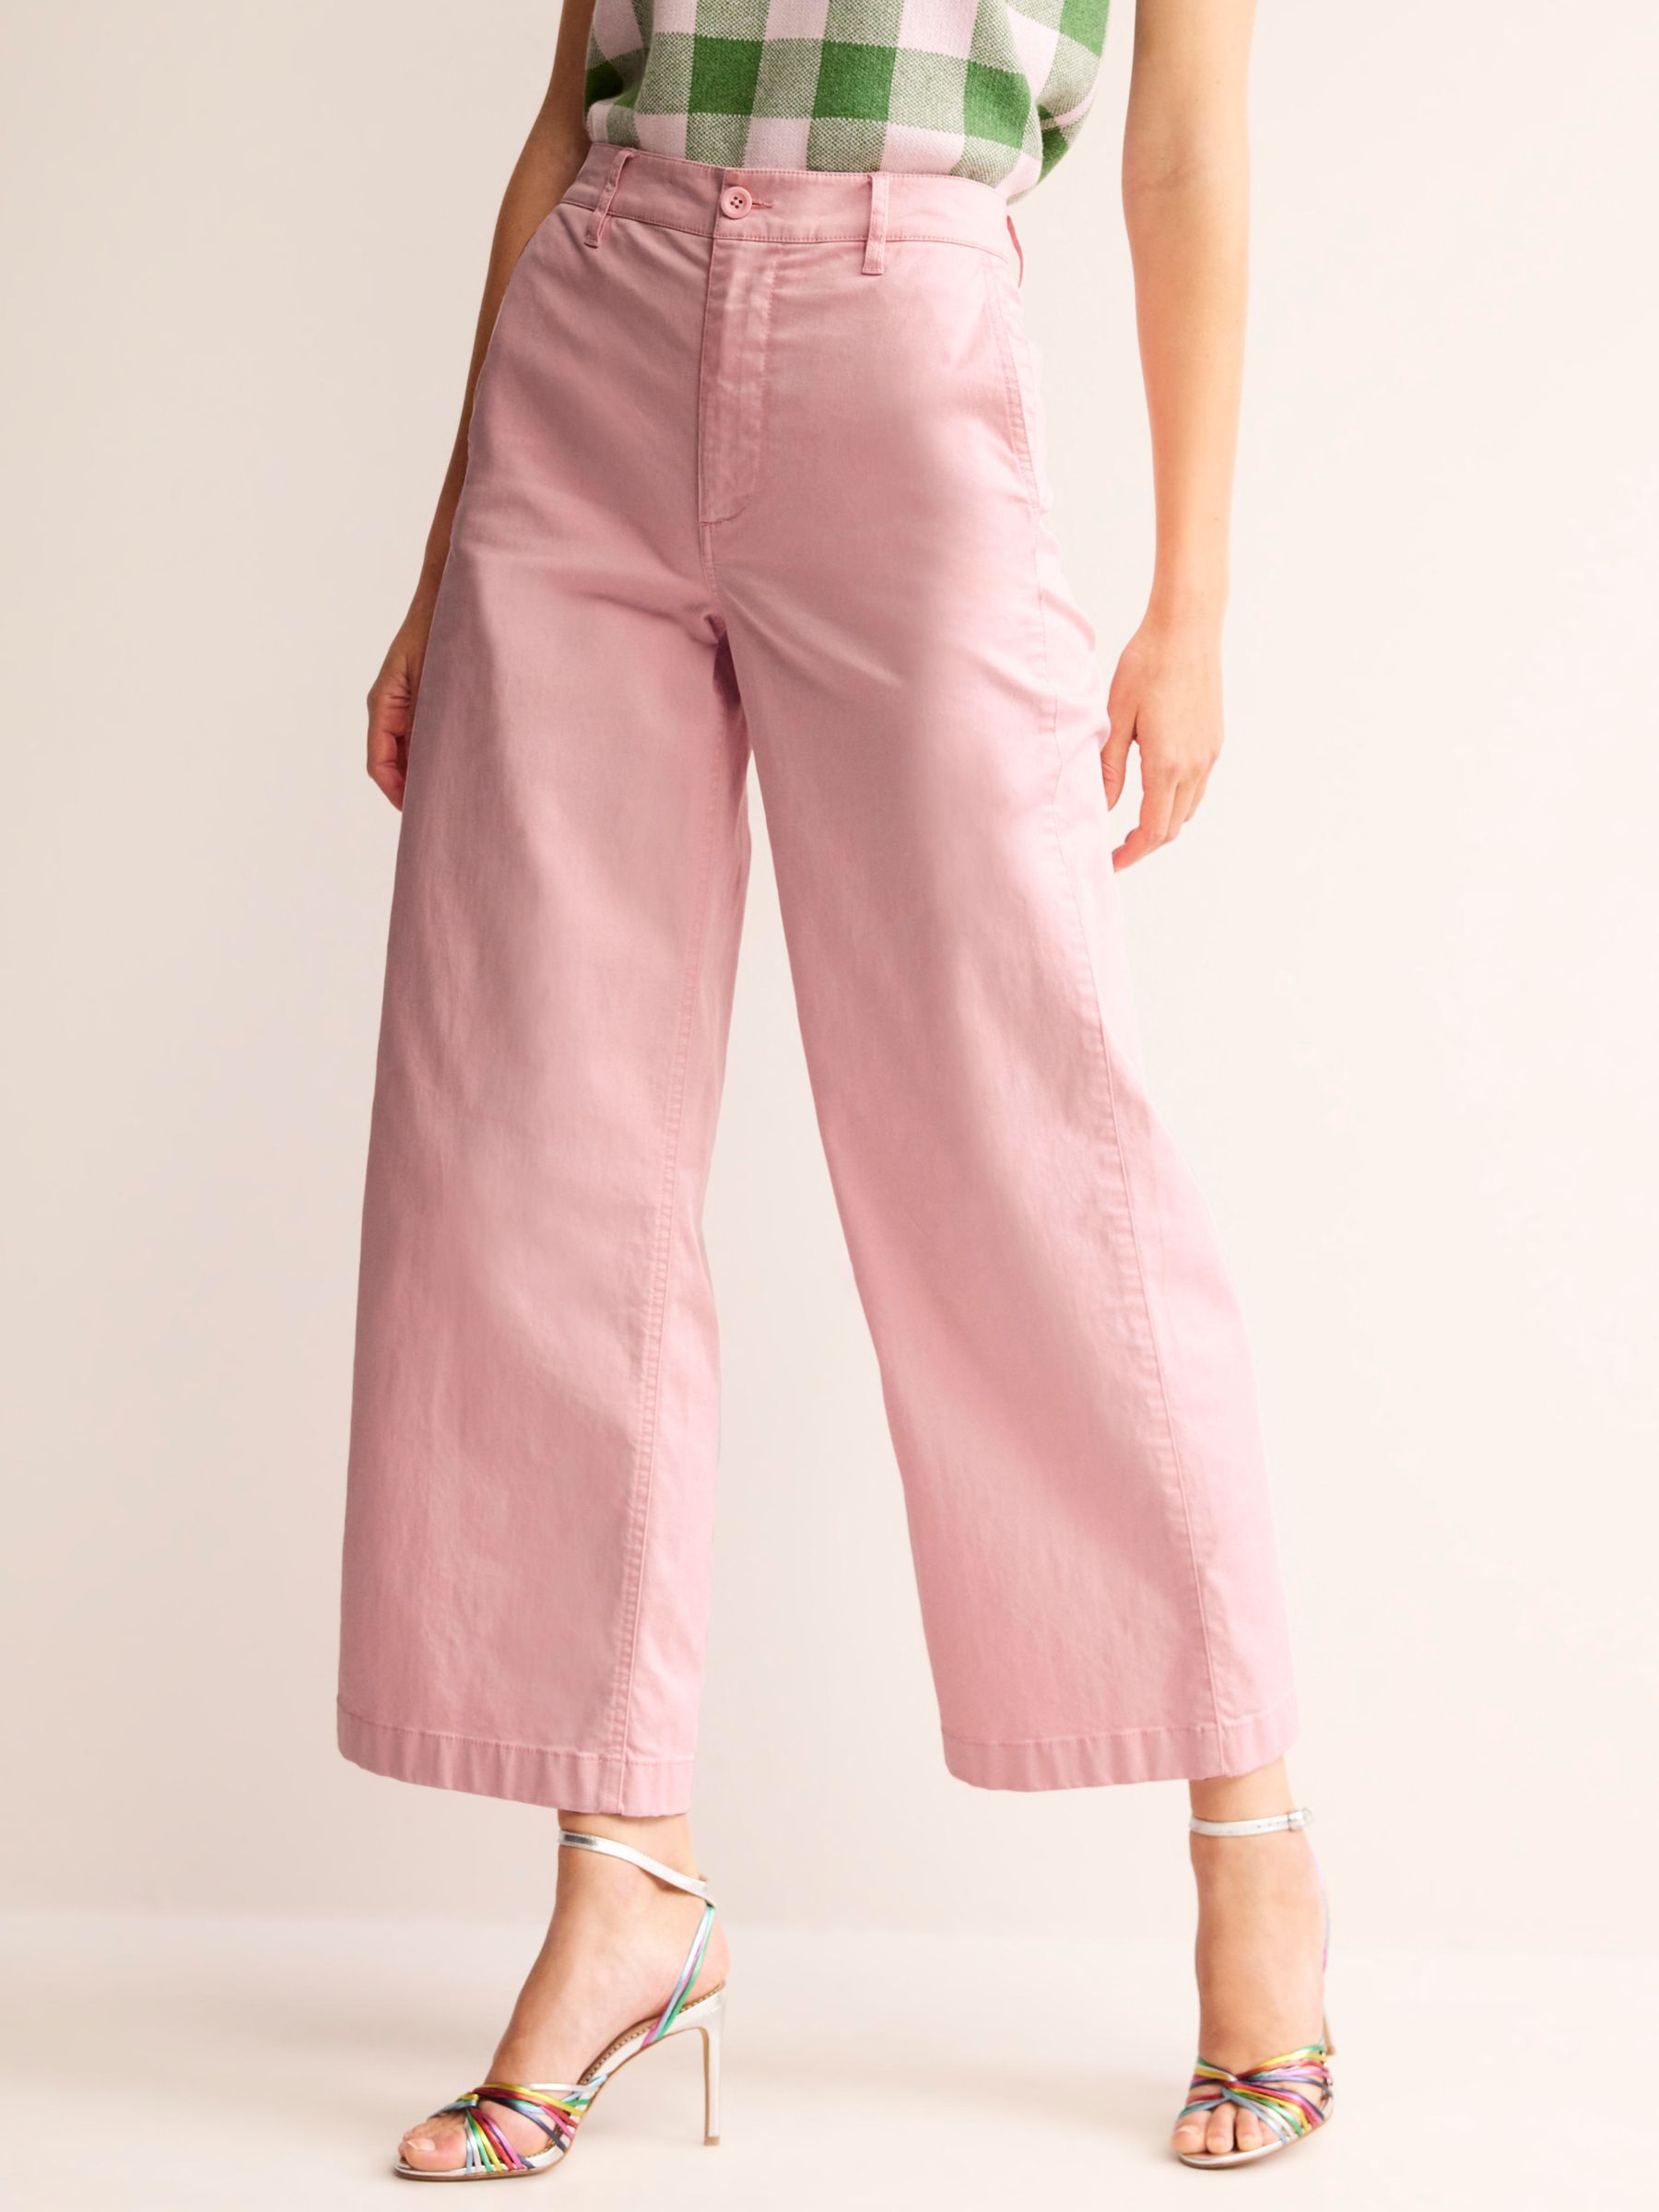 Boden Barnsbury Cropped Wide Leg Trousers, Blush at John Lewis & Partners